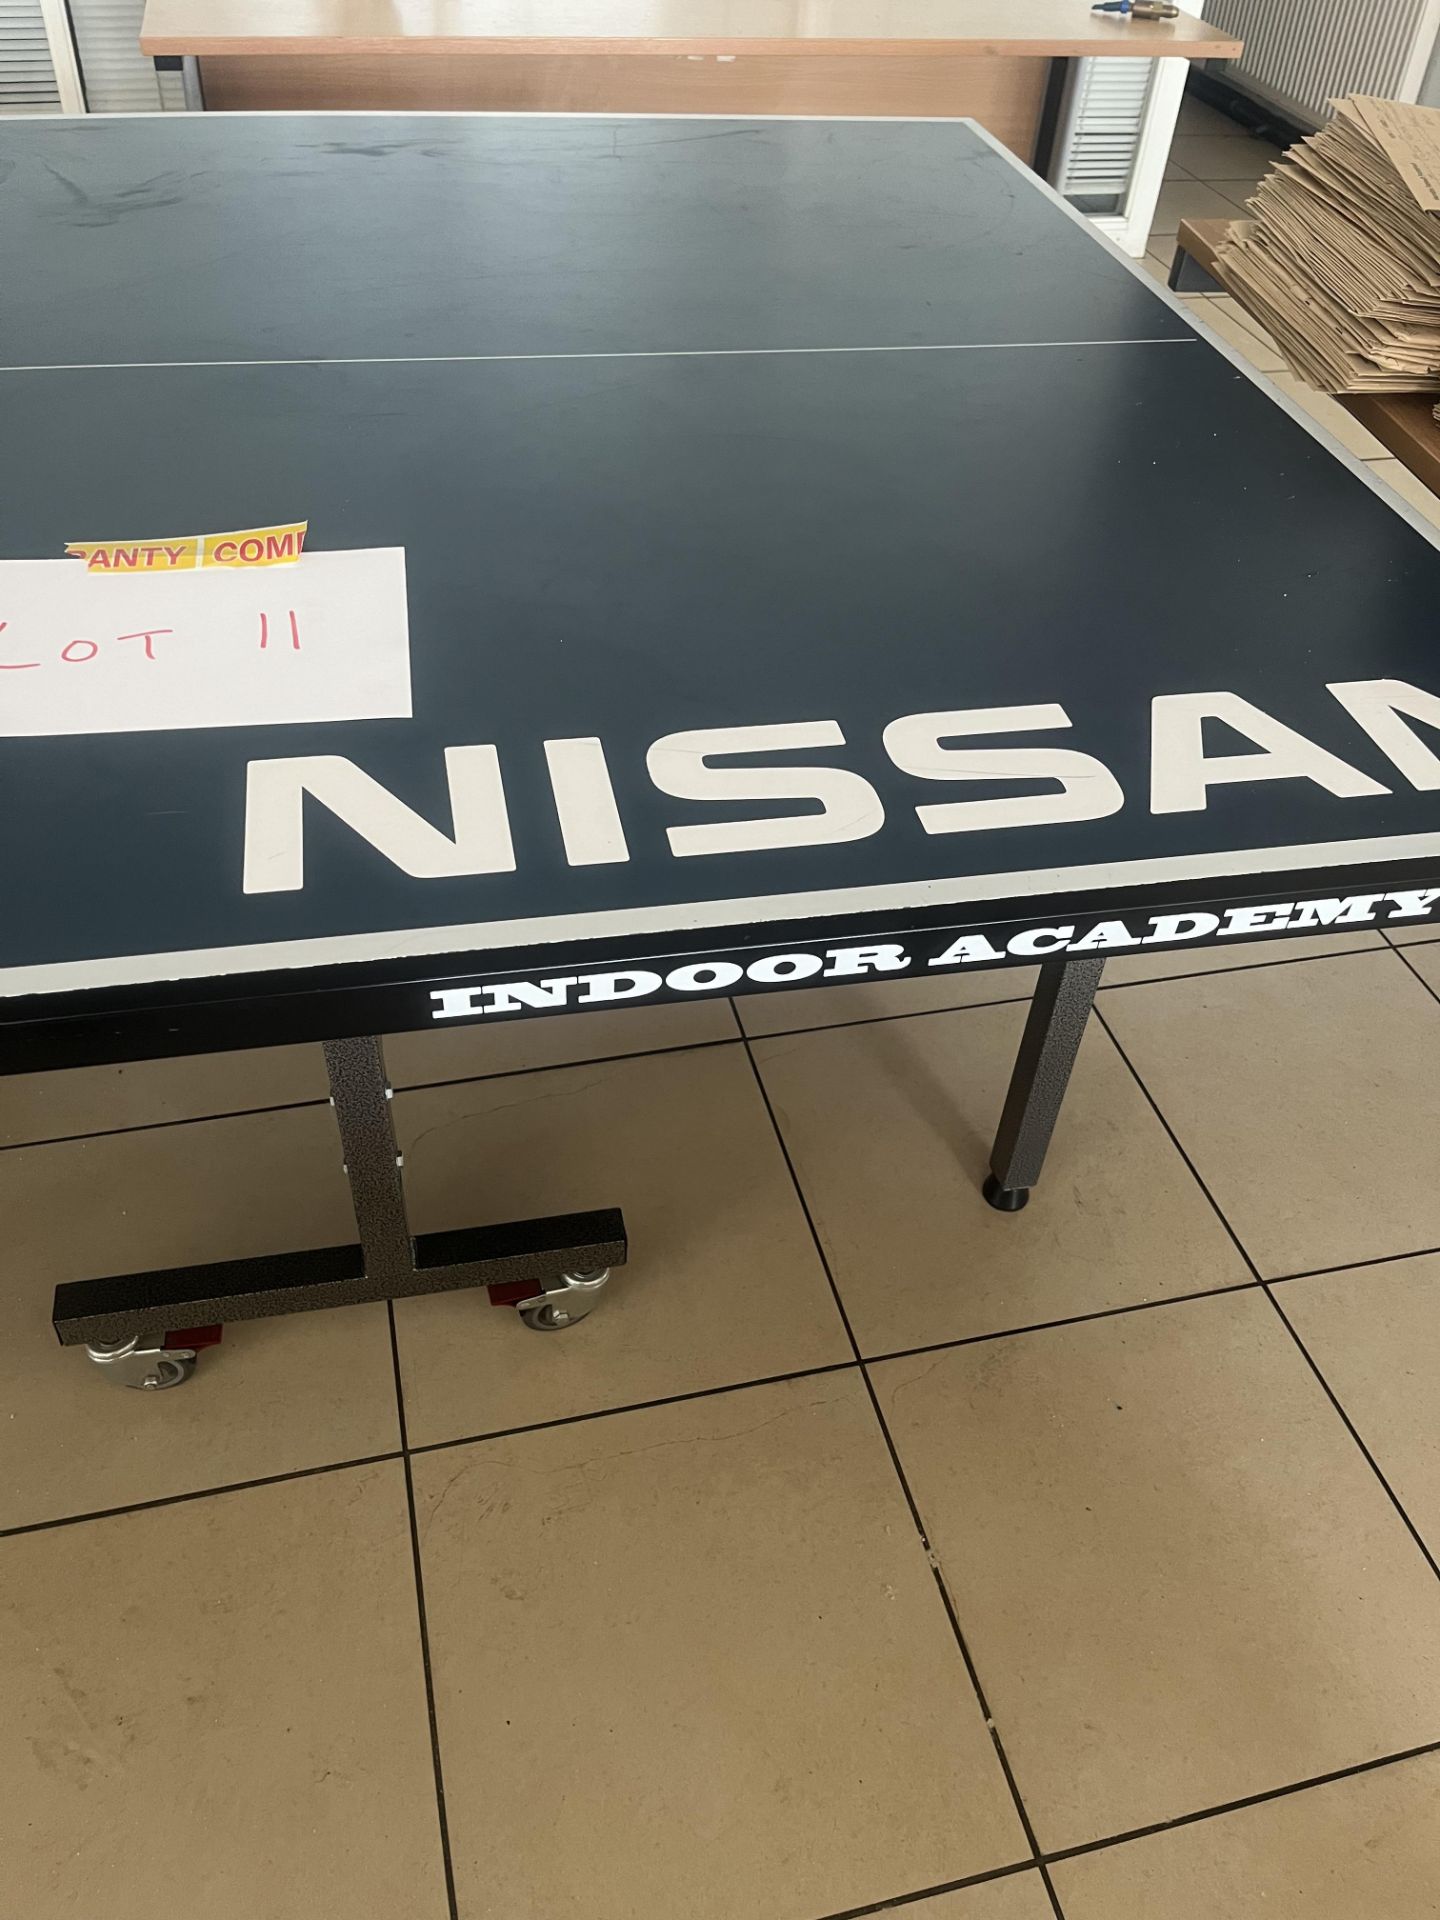 Nissan fold away table tennis table complete with two bats and four balls - Image 5 of 8